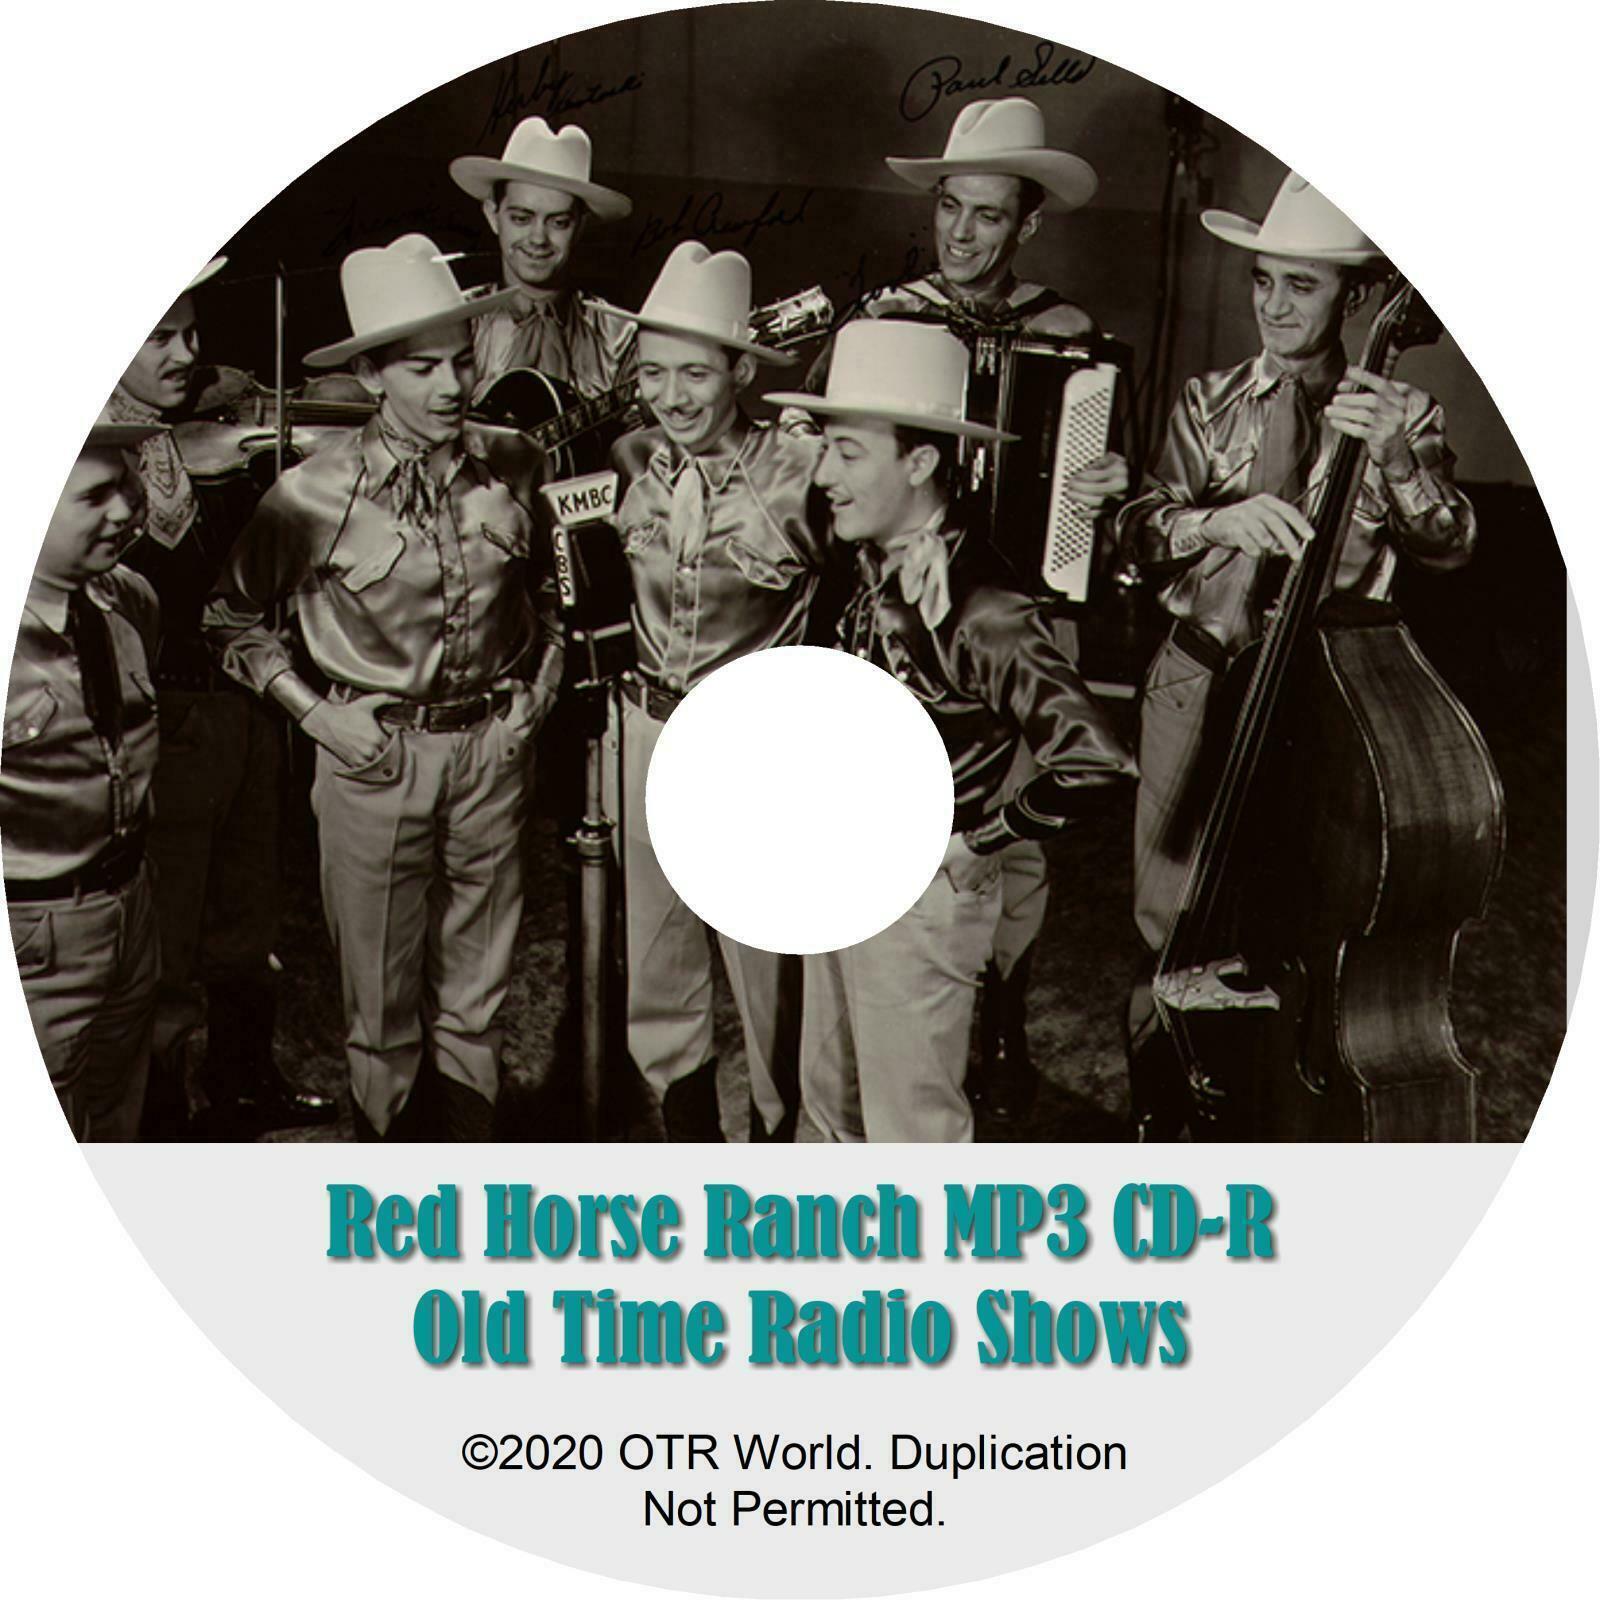 Red Horse Ranch Show OTR OTRS Old Time Radio Shows MP3 CD-R 26 Episodes